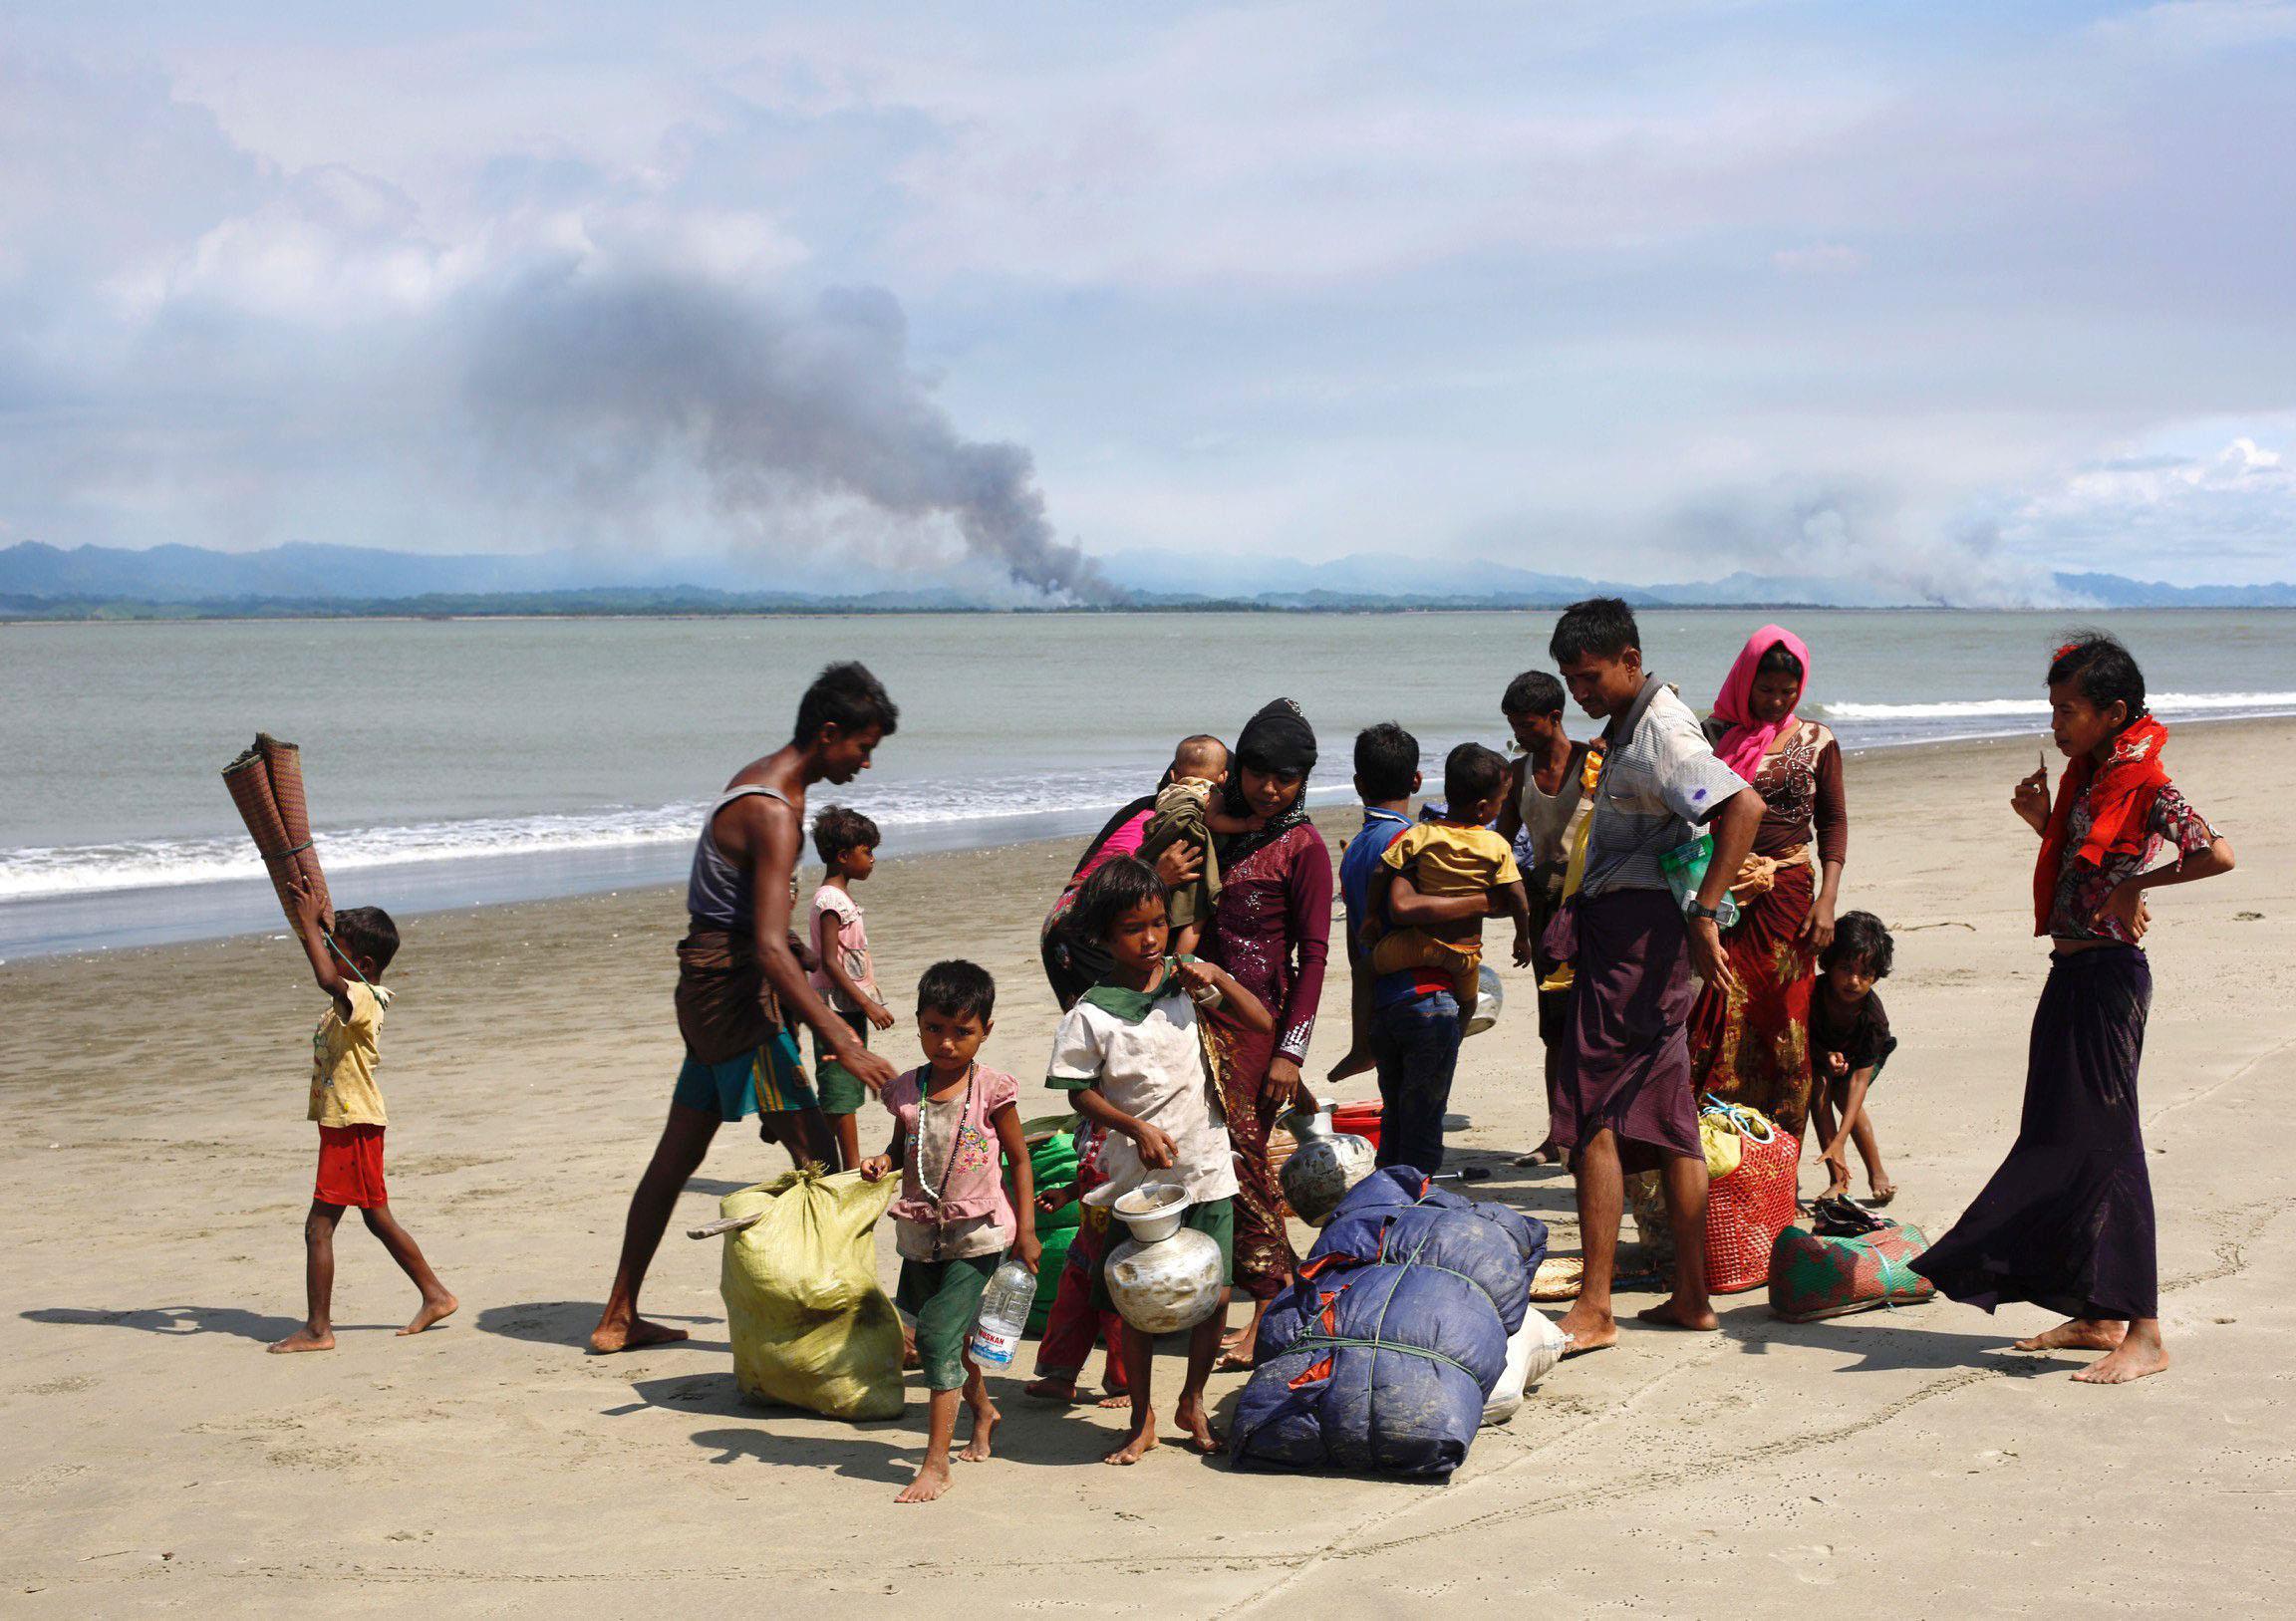 Smoke is seen on Myanmar's side of border as Rohingya refugees collect their belongings on a shore a